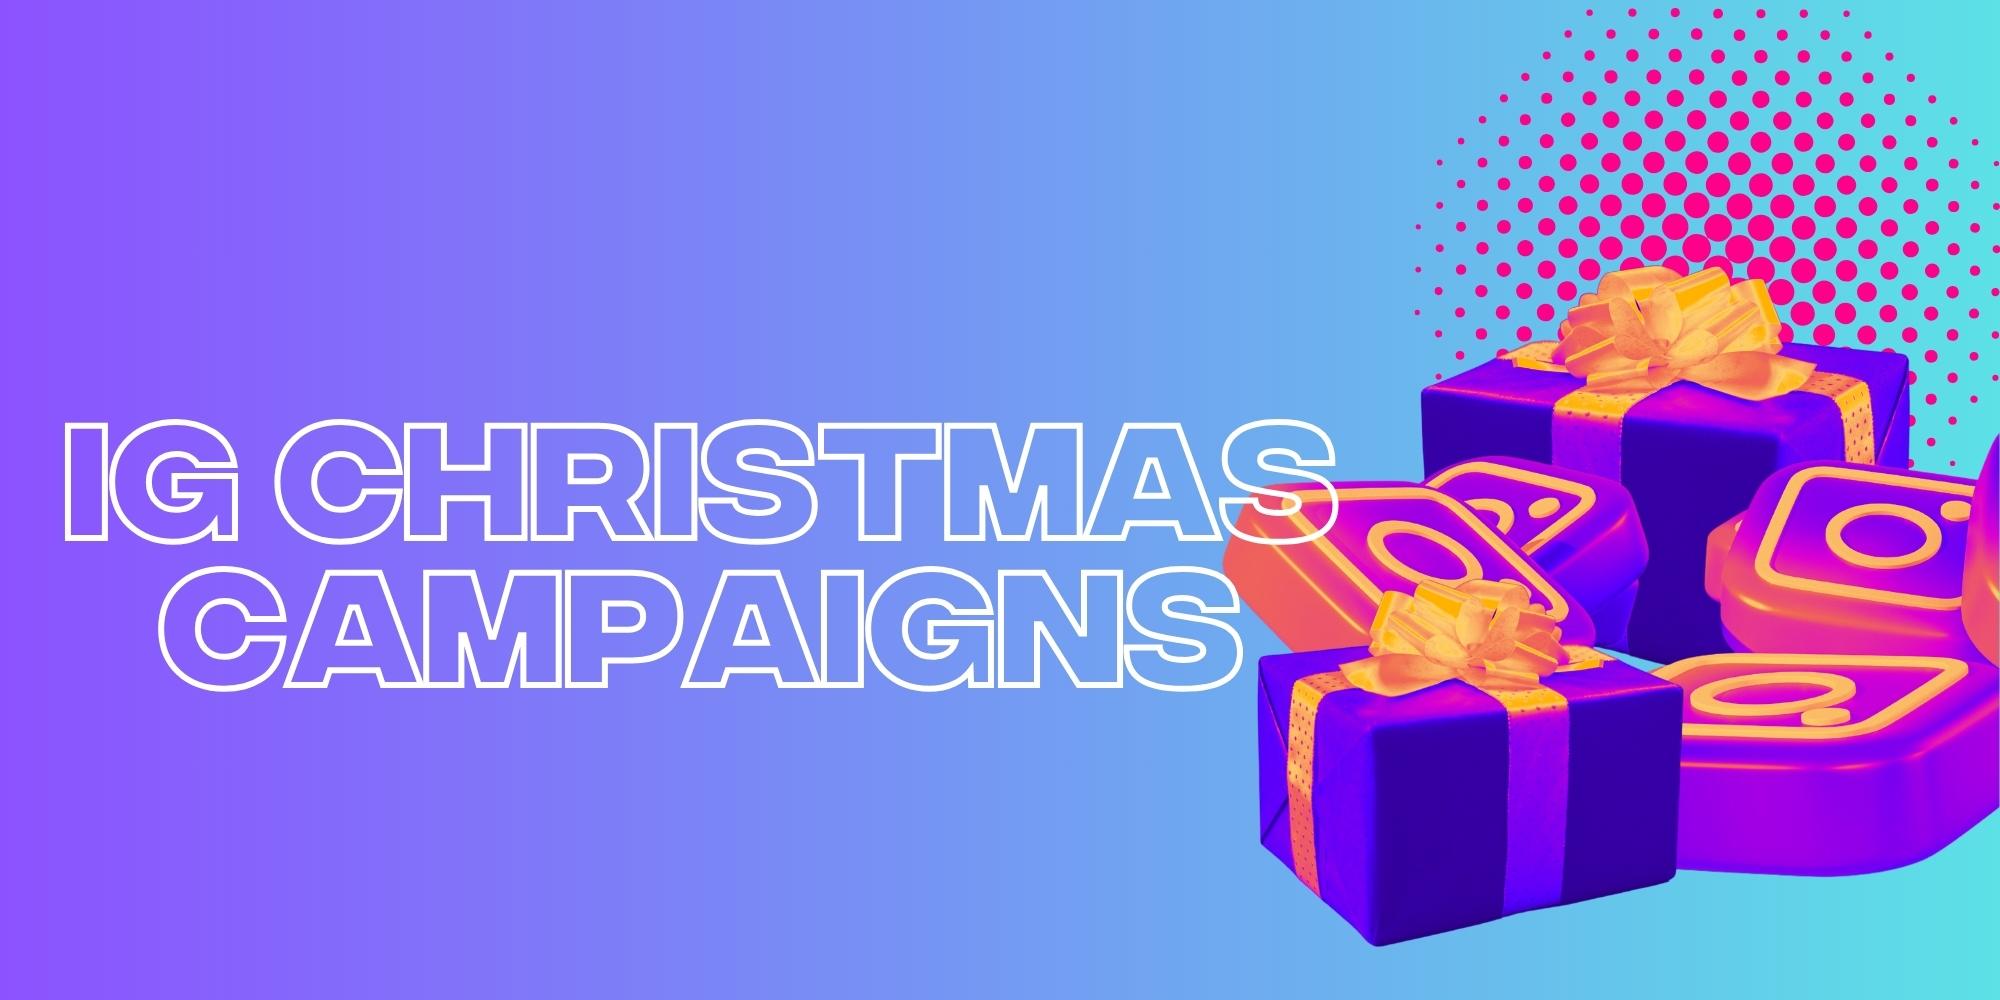 Christmas Marketing Campaigns: Ideas For Instagram